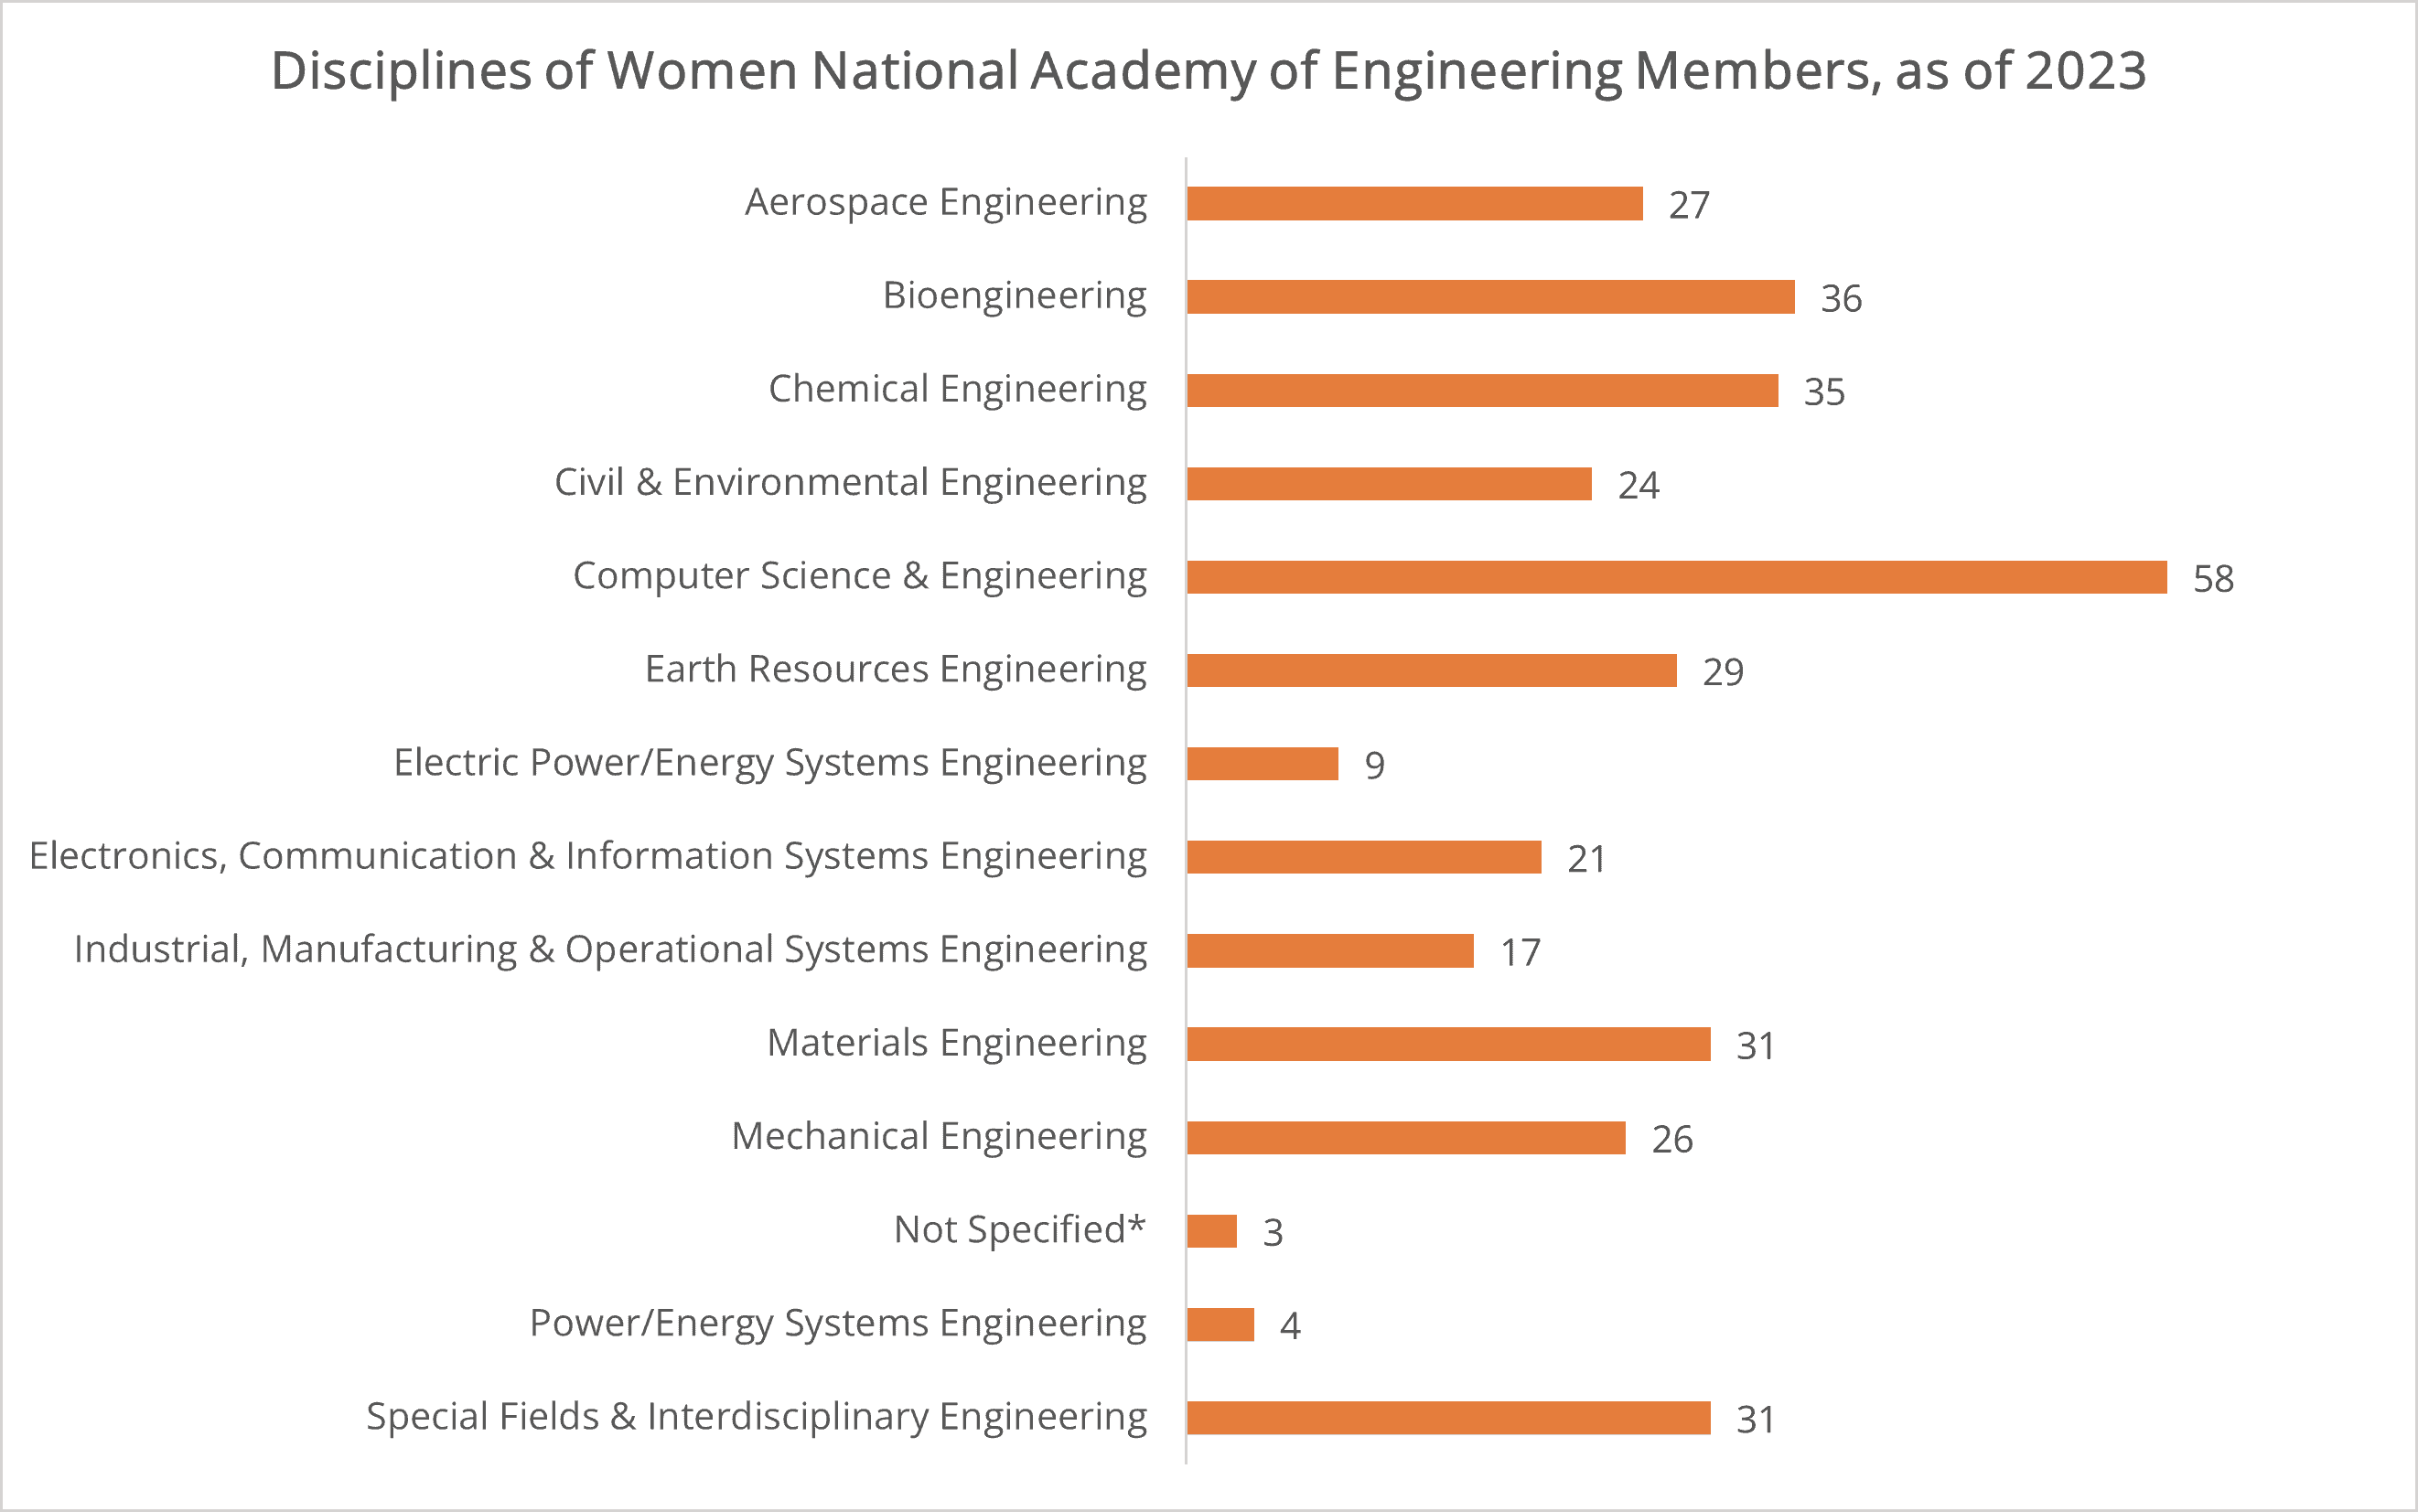 List of the NAE women members by discipline